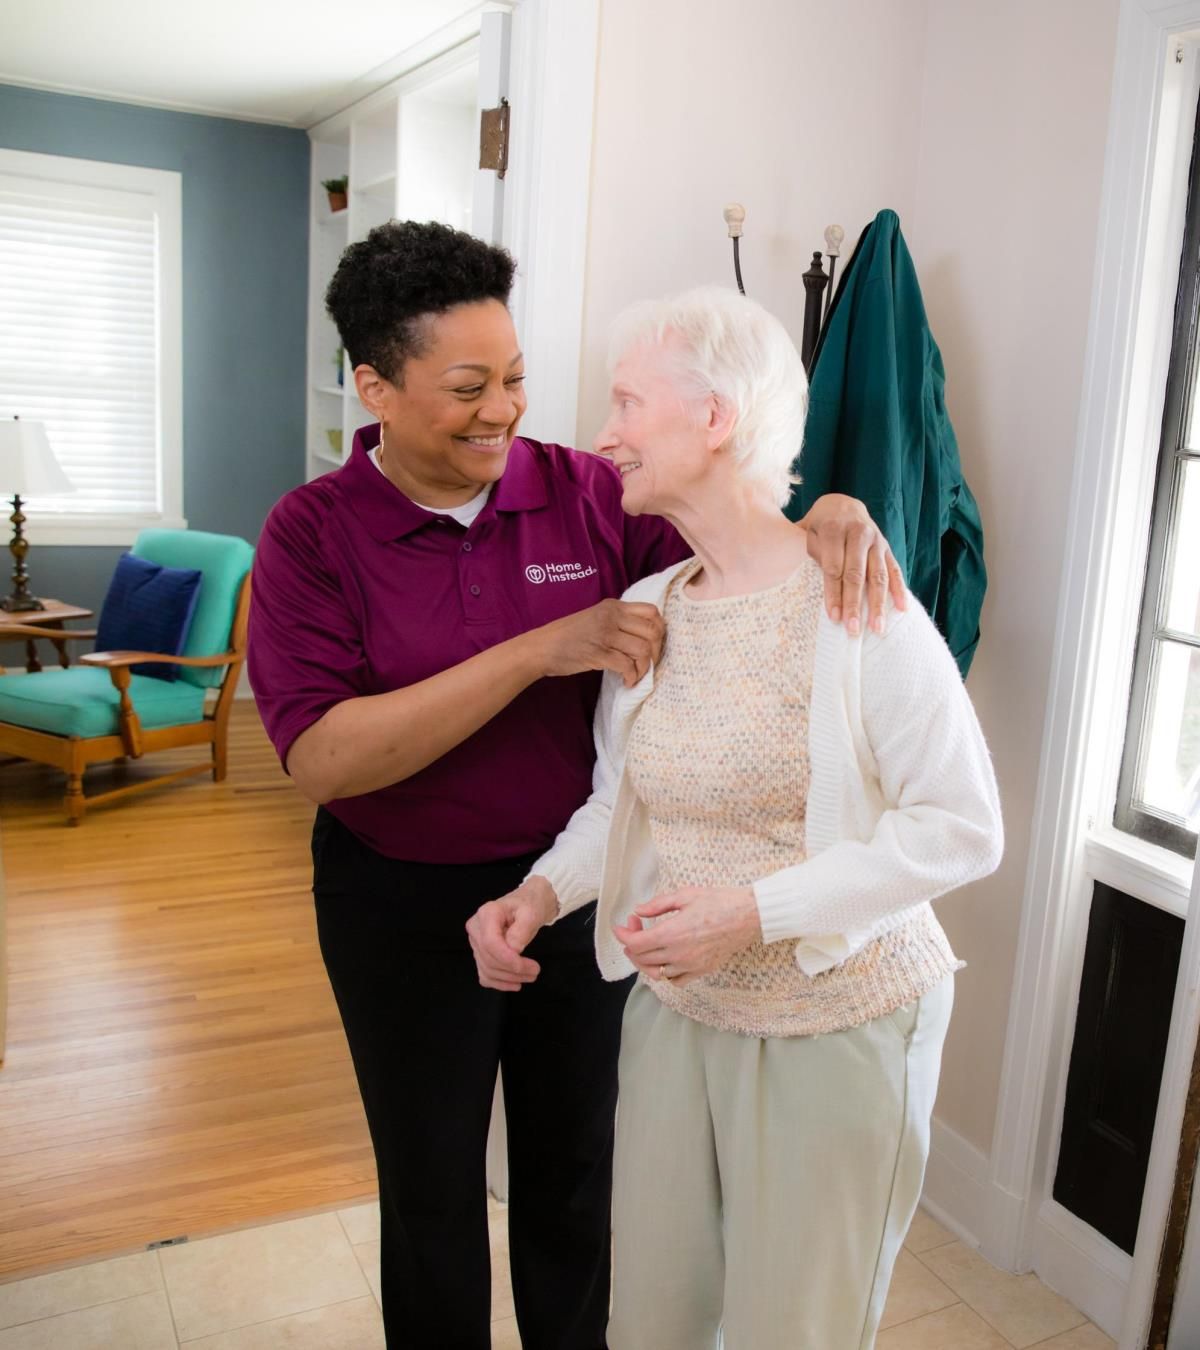 Home Instead Caregiver and senior client sharing a warm smile and side hug